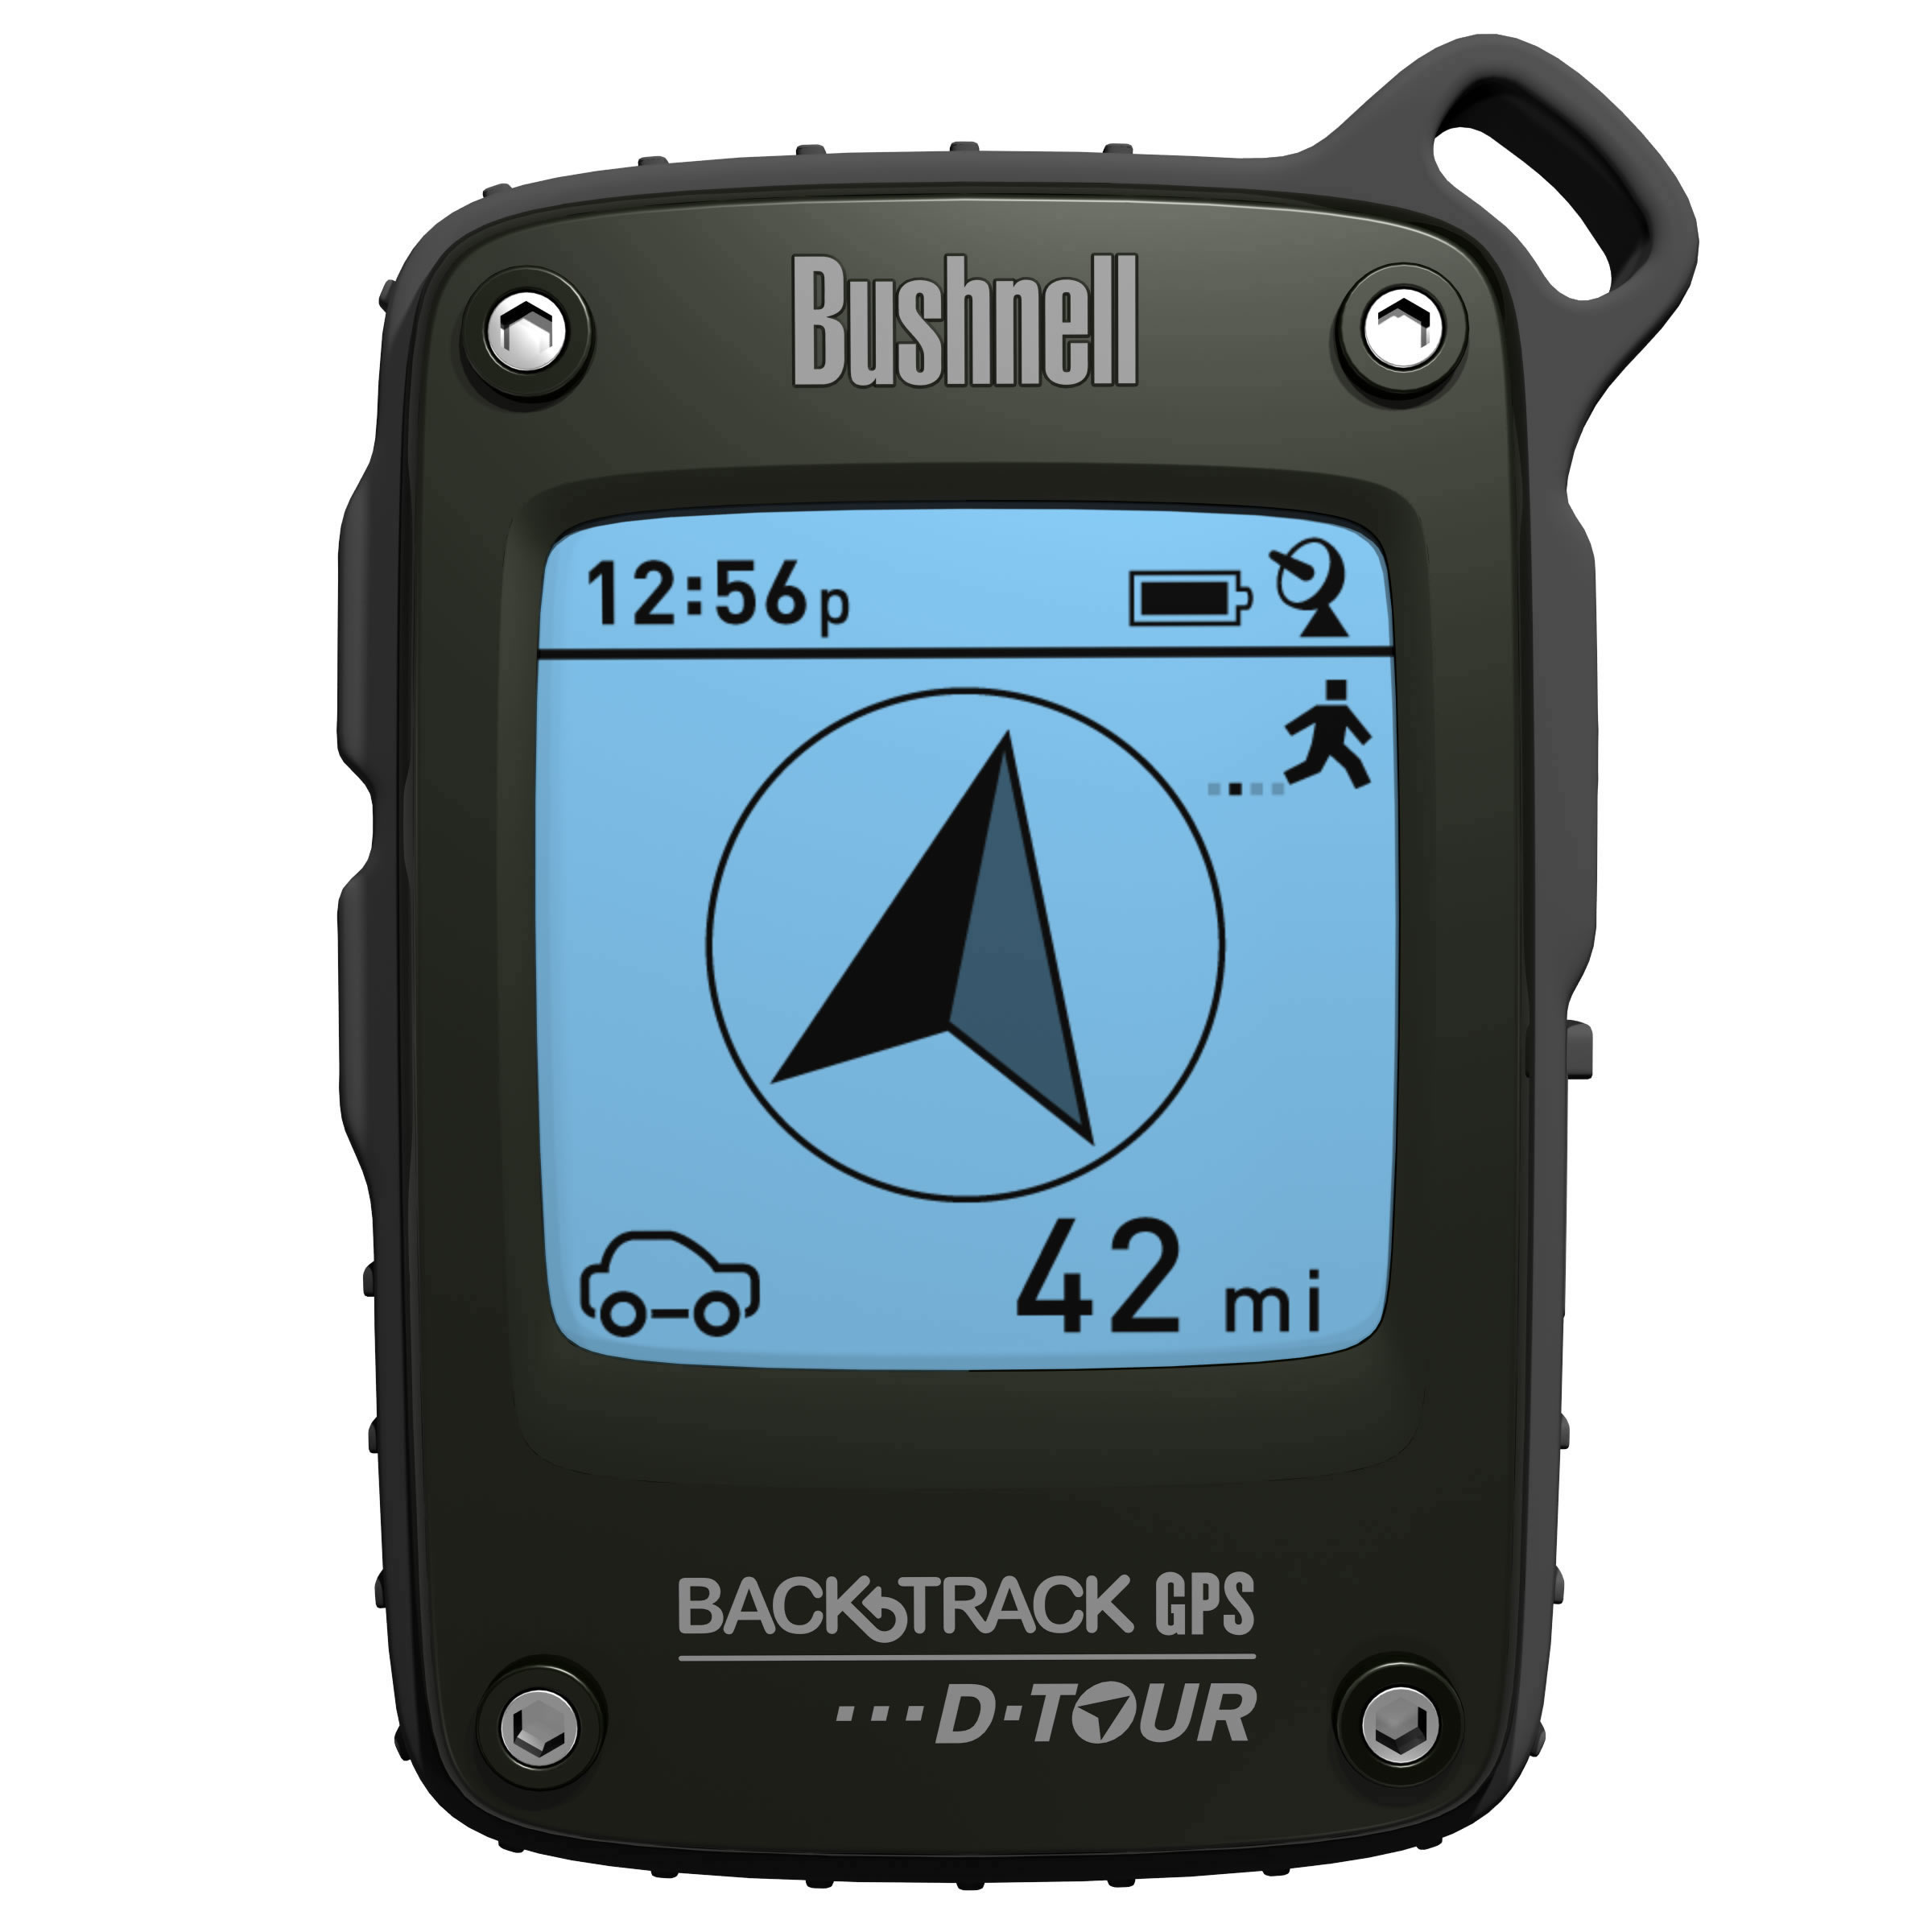 & Stream Recognizes the New Bushnell BackTrack D-TOUR Personal Device Best of the Best Award |